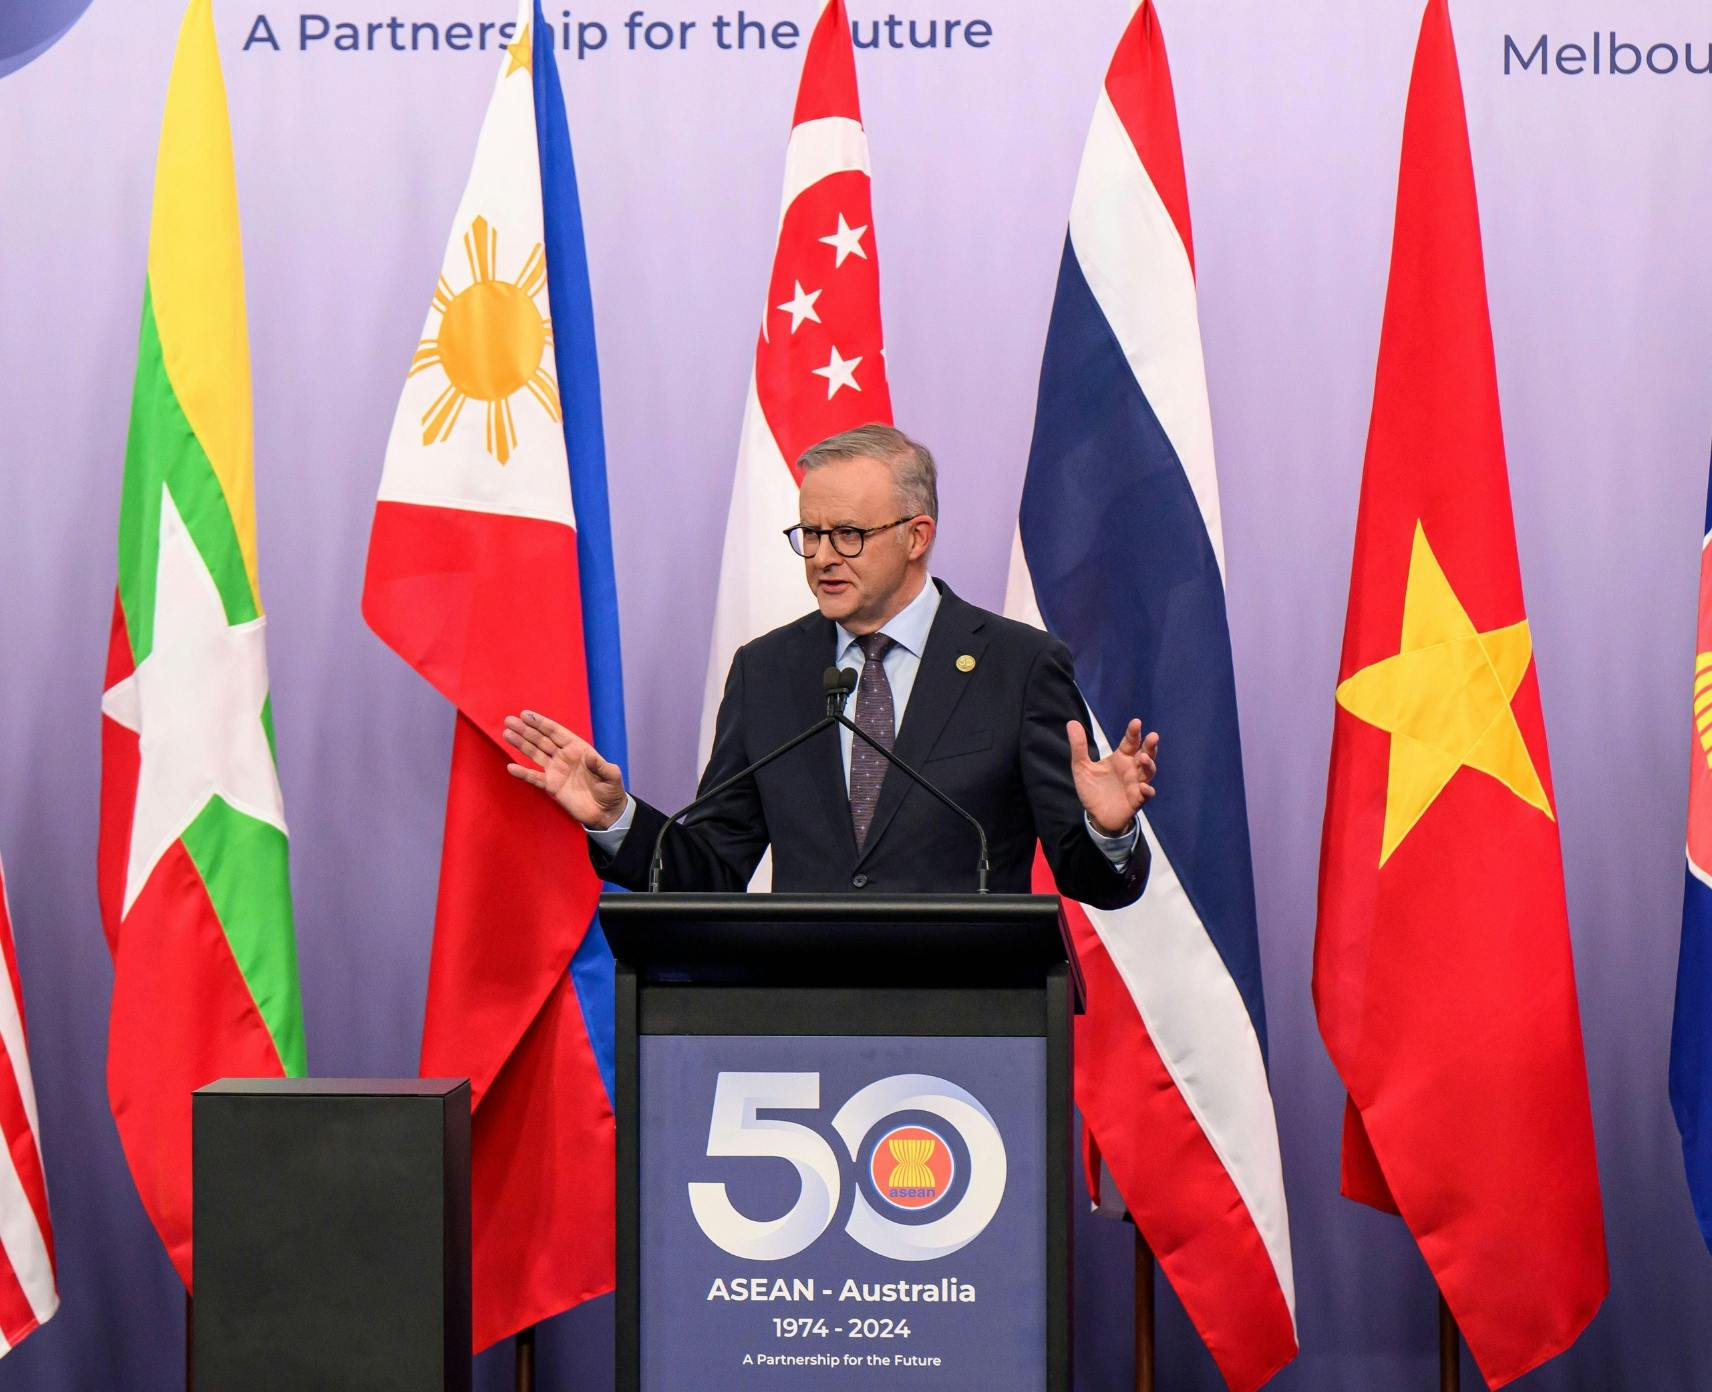 PM Anthony Albanese speaks at the ASEAN-Australia special summit in Melbourne